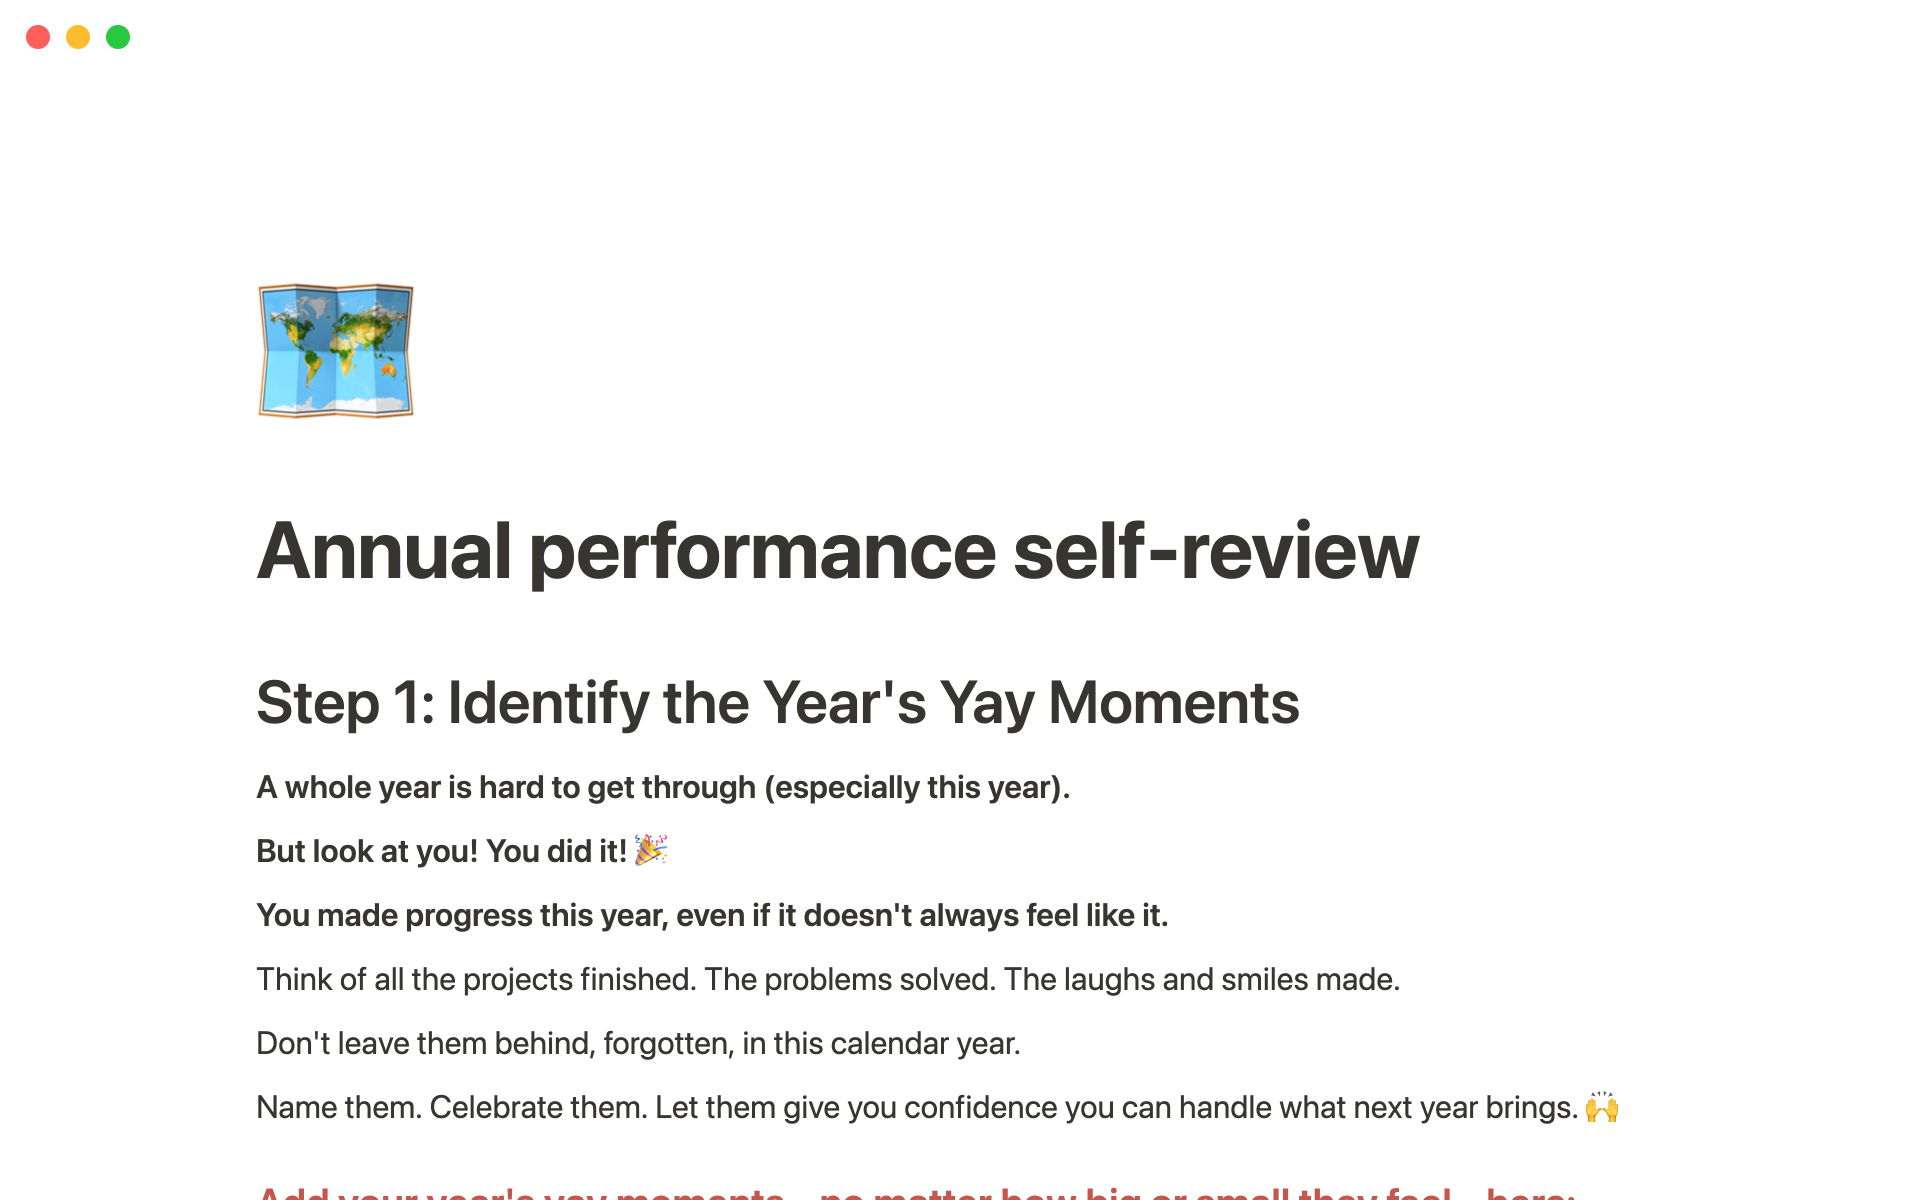 Self reviews are hard. But with few useful prompts to get you started, it can be much easier to reflect, take note, and make a plan for the future.